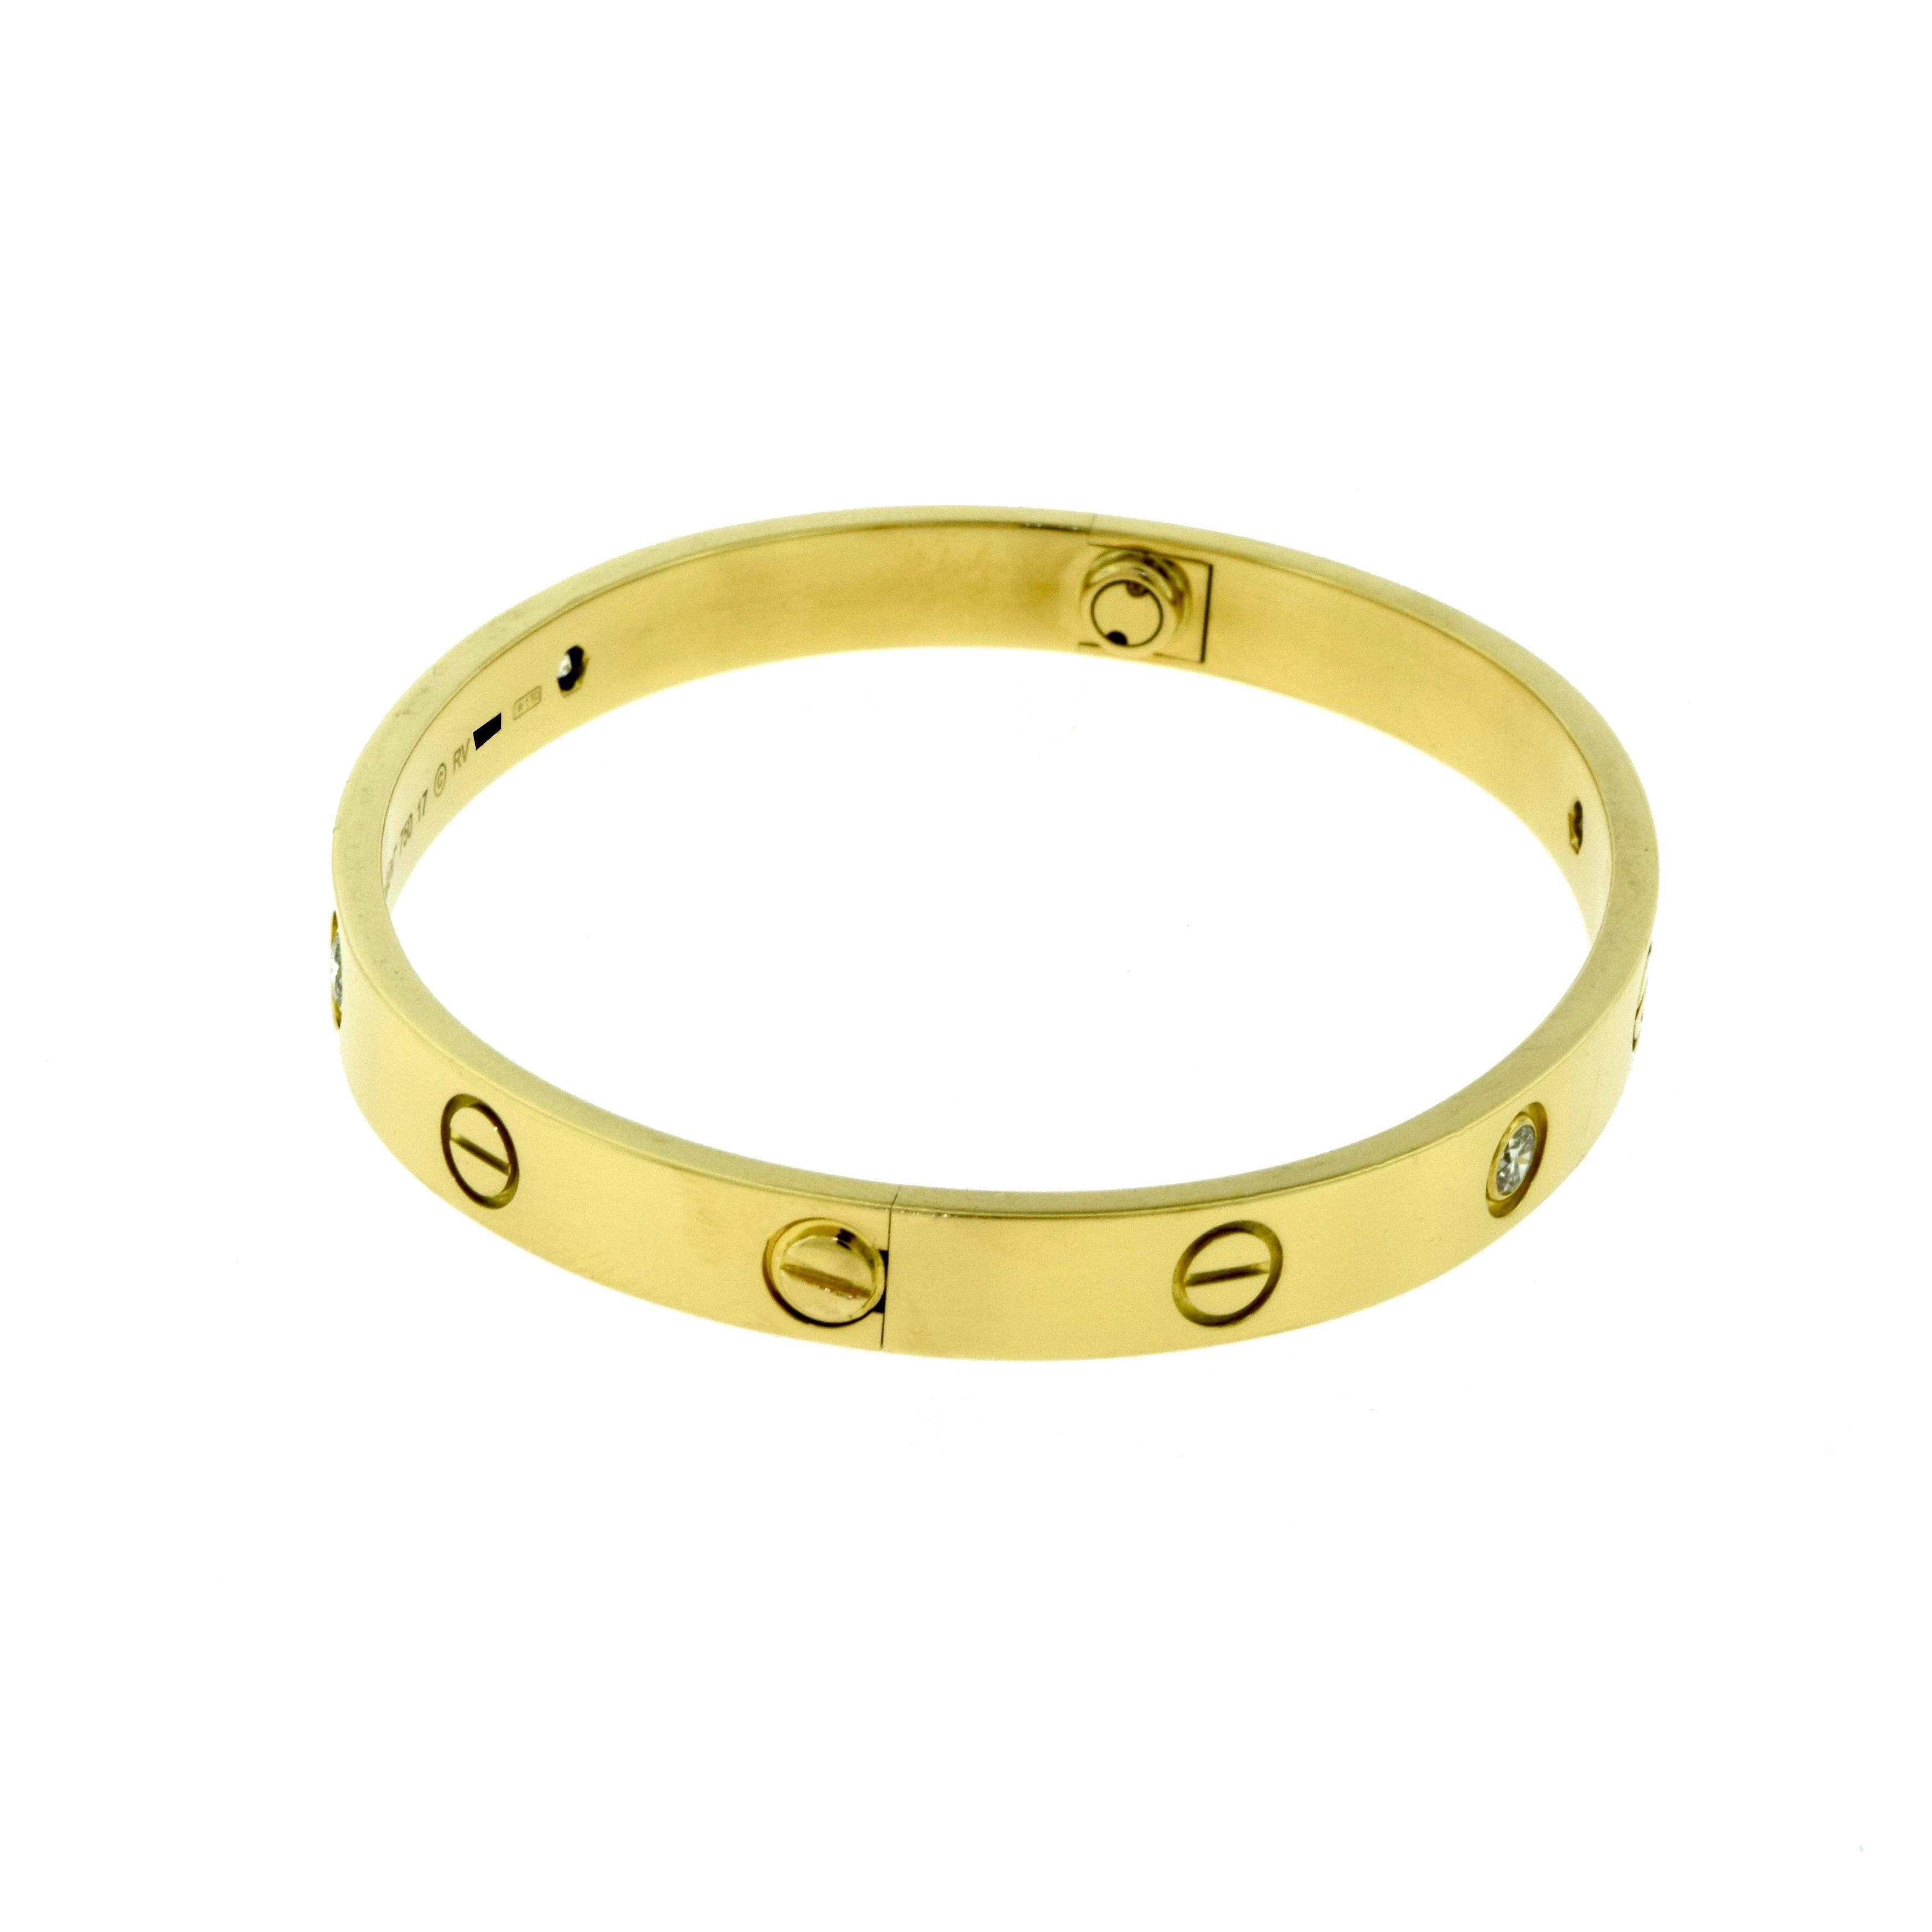 Cartier Love Bracelet in 18 Karat Yellow Gold, Four Diamonds In Excellent Condition For Sale In Miami, FL